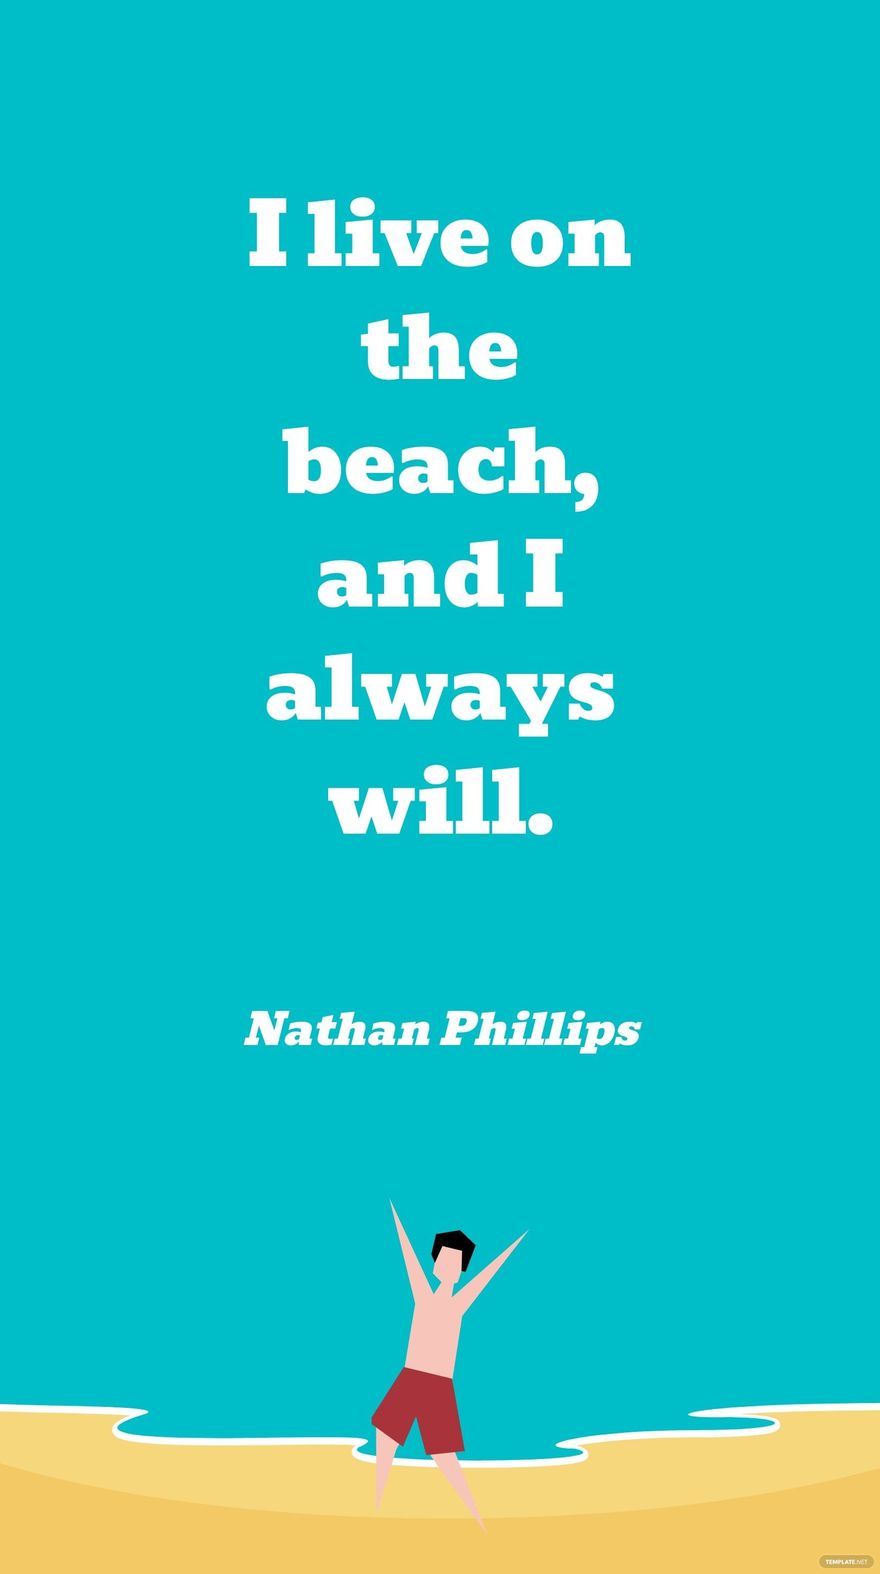 Nathan Phillips - I live on the beach, and I always will.